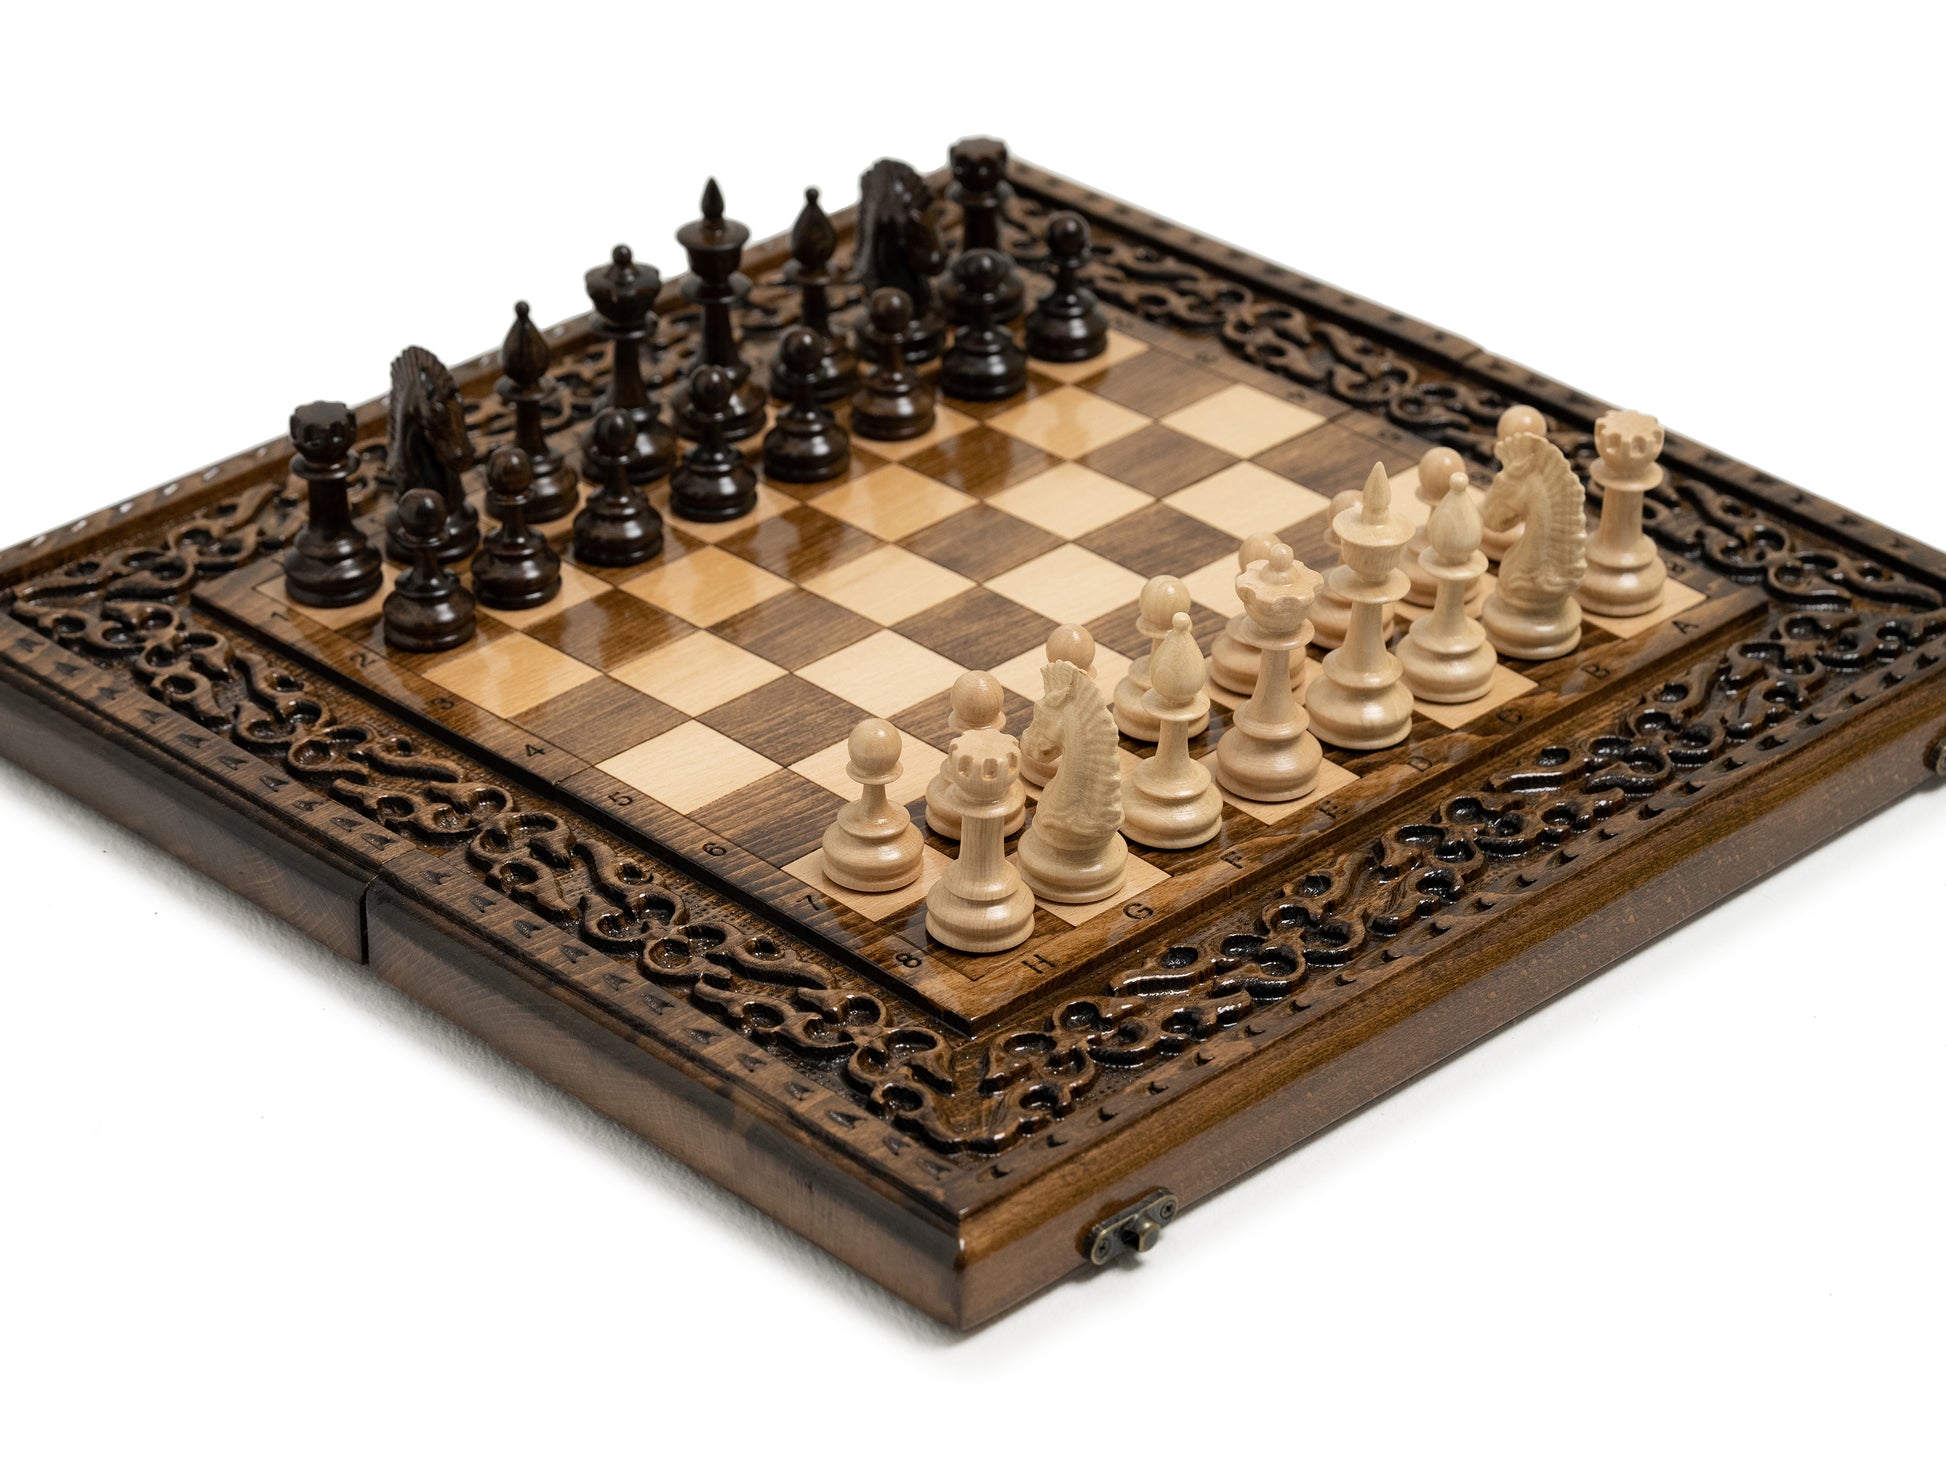 Unique chess set with intricate detailing and design